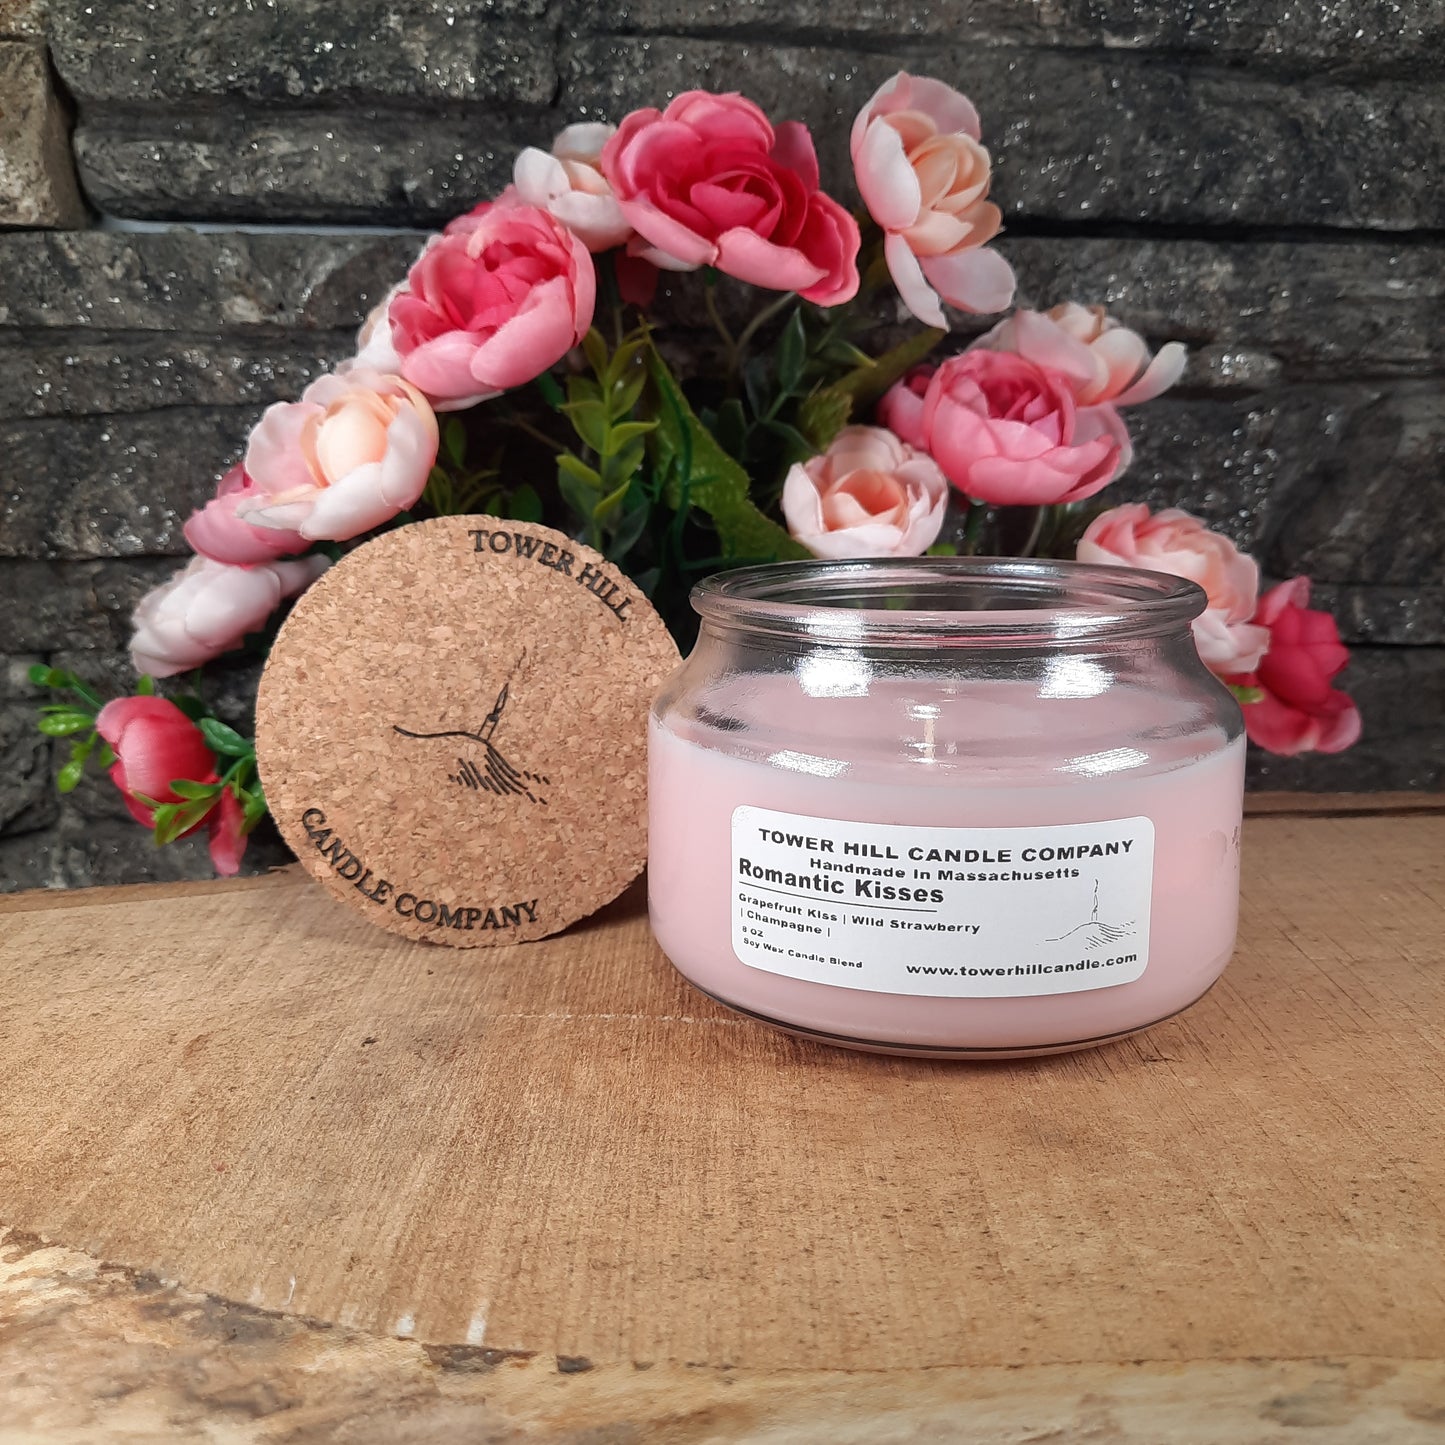 Romantic Kisses Apothecary Candle